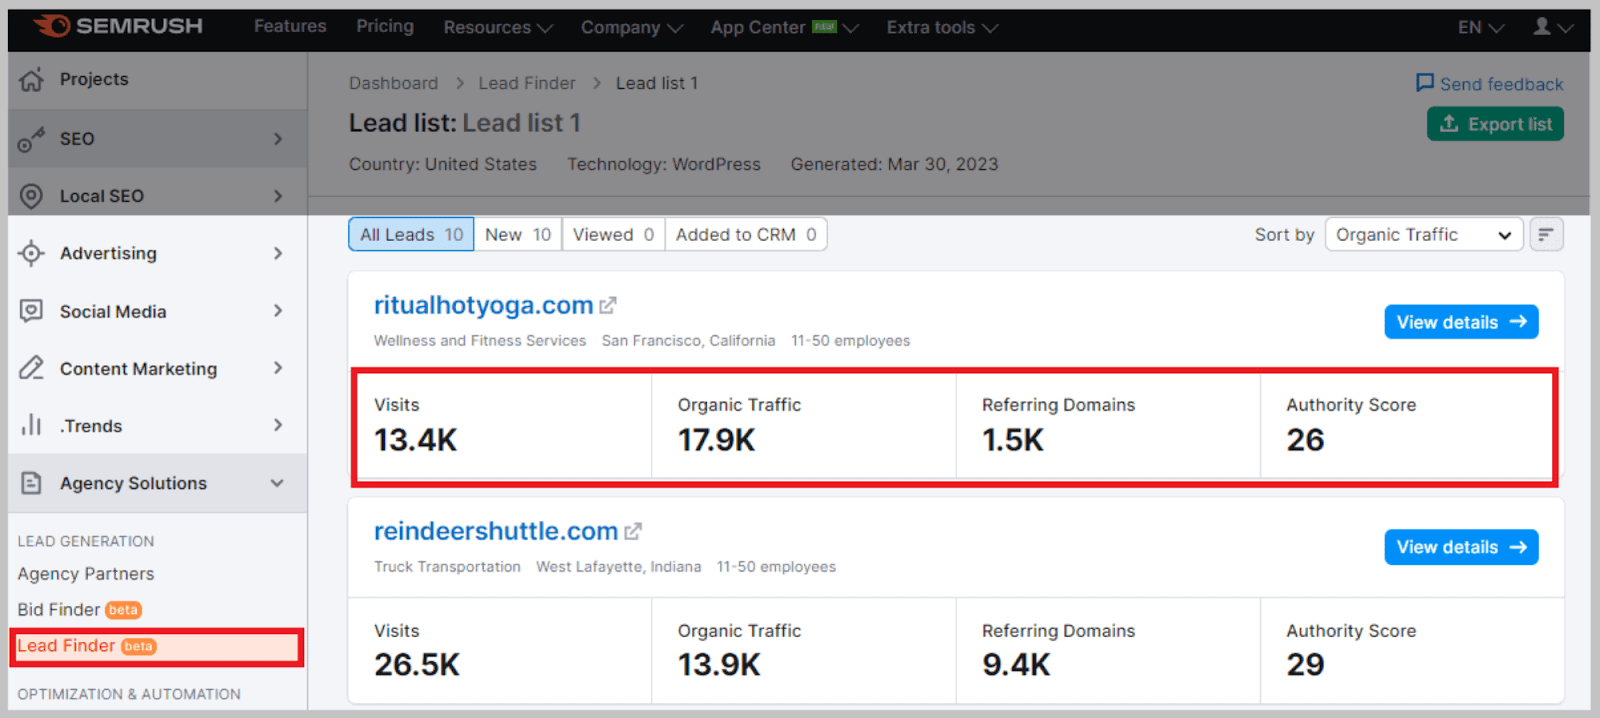 See a summary of your site's key metrics